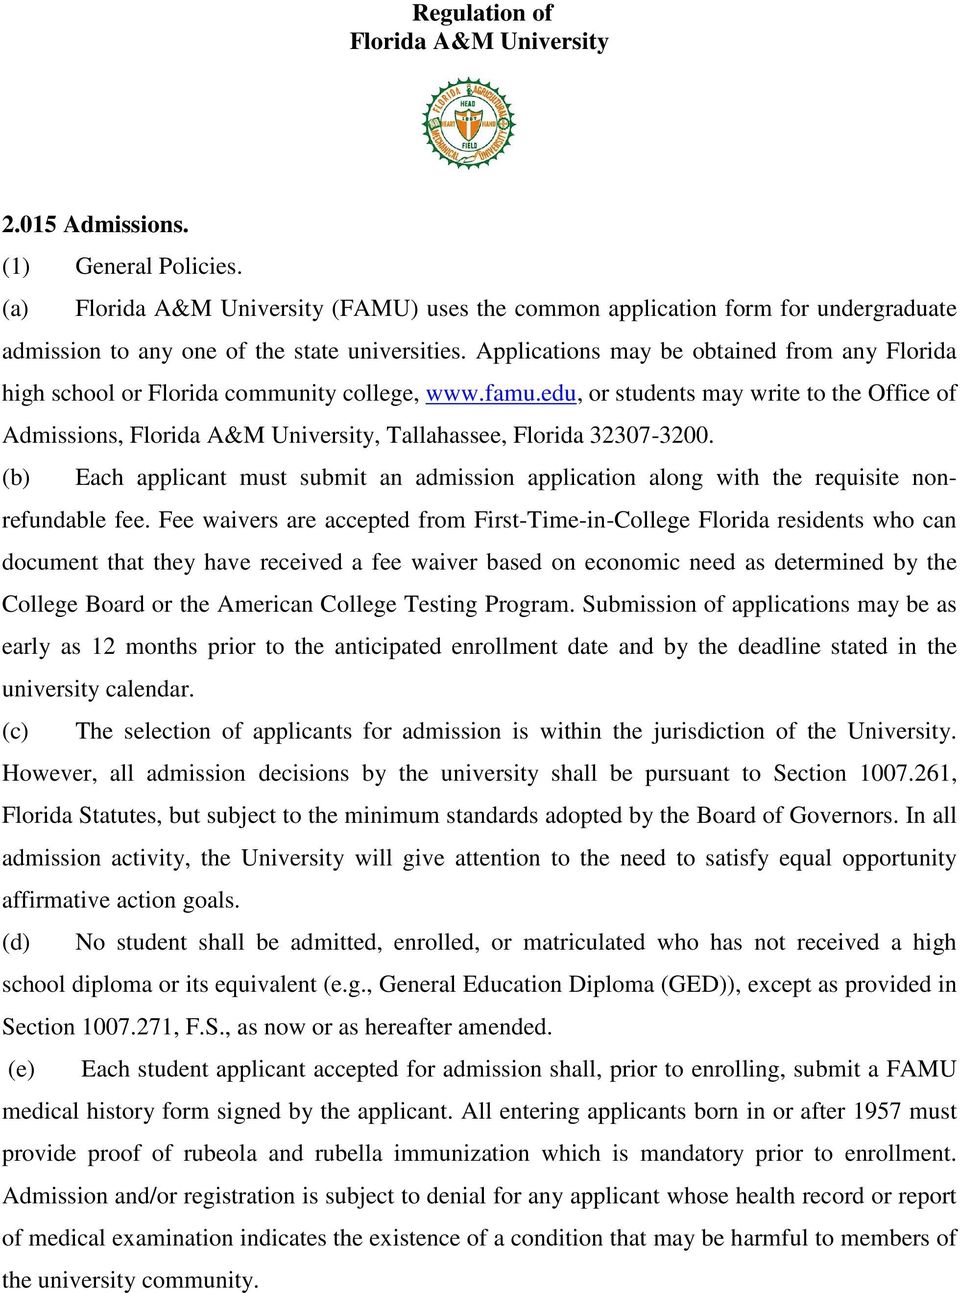 Applications may be obtained from any Florida high school or Florida community college, www.famu.